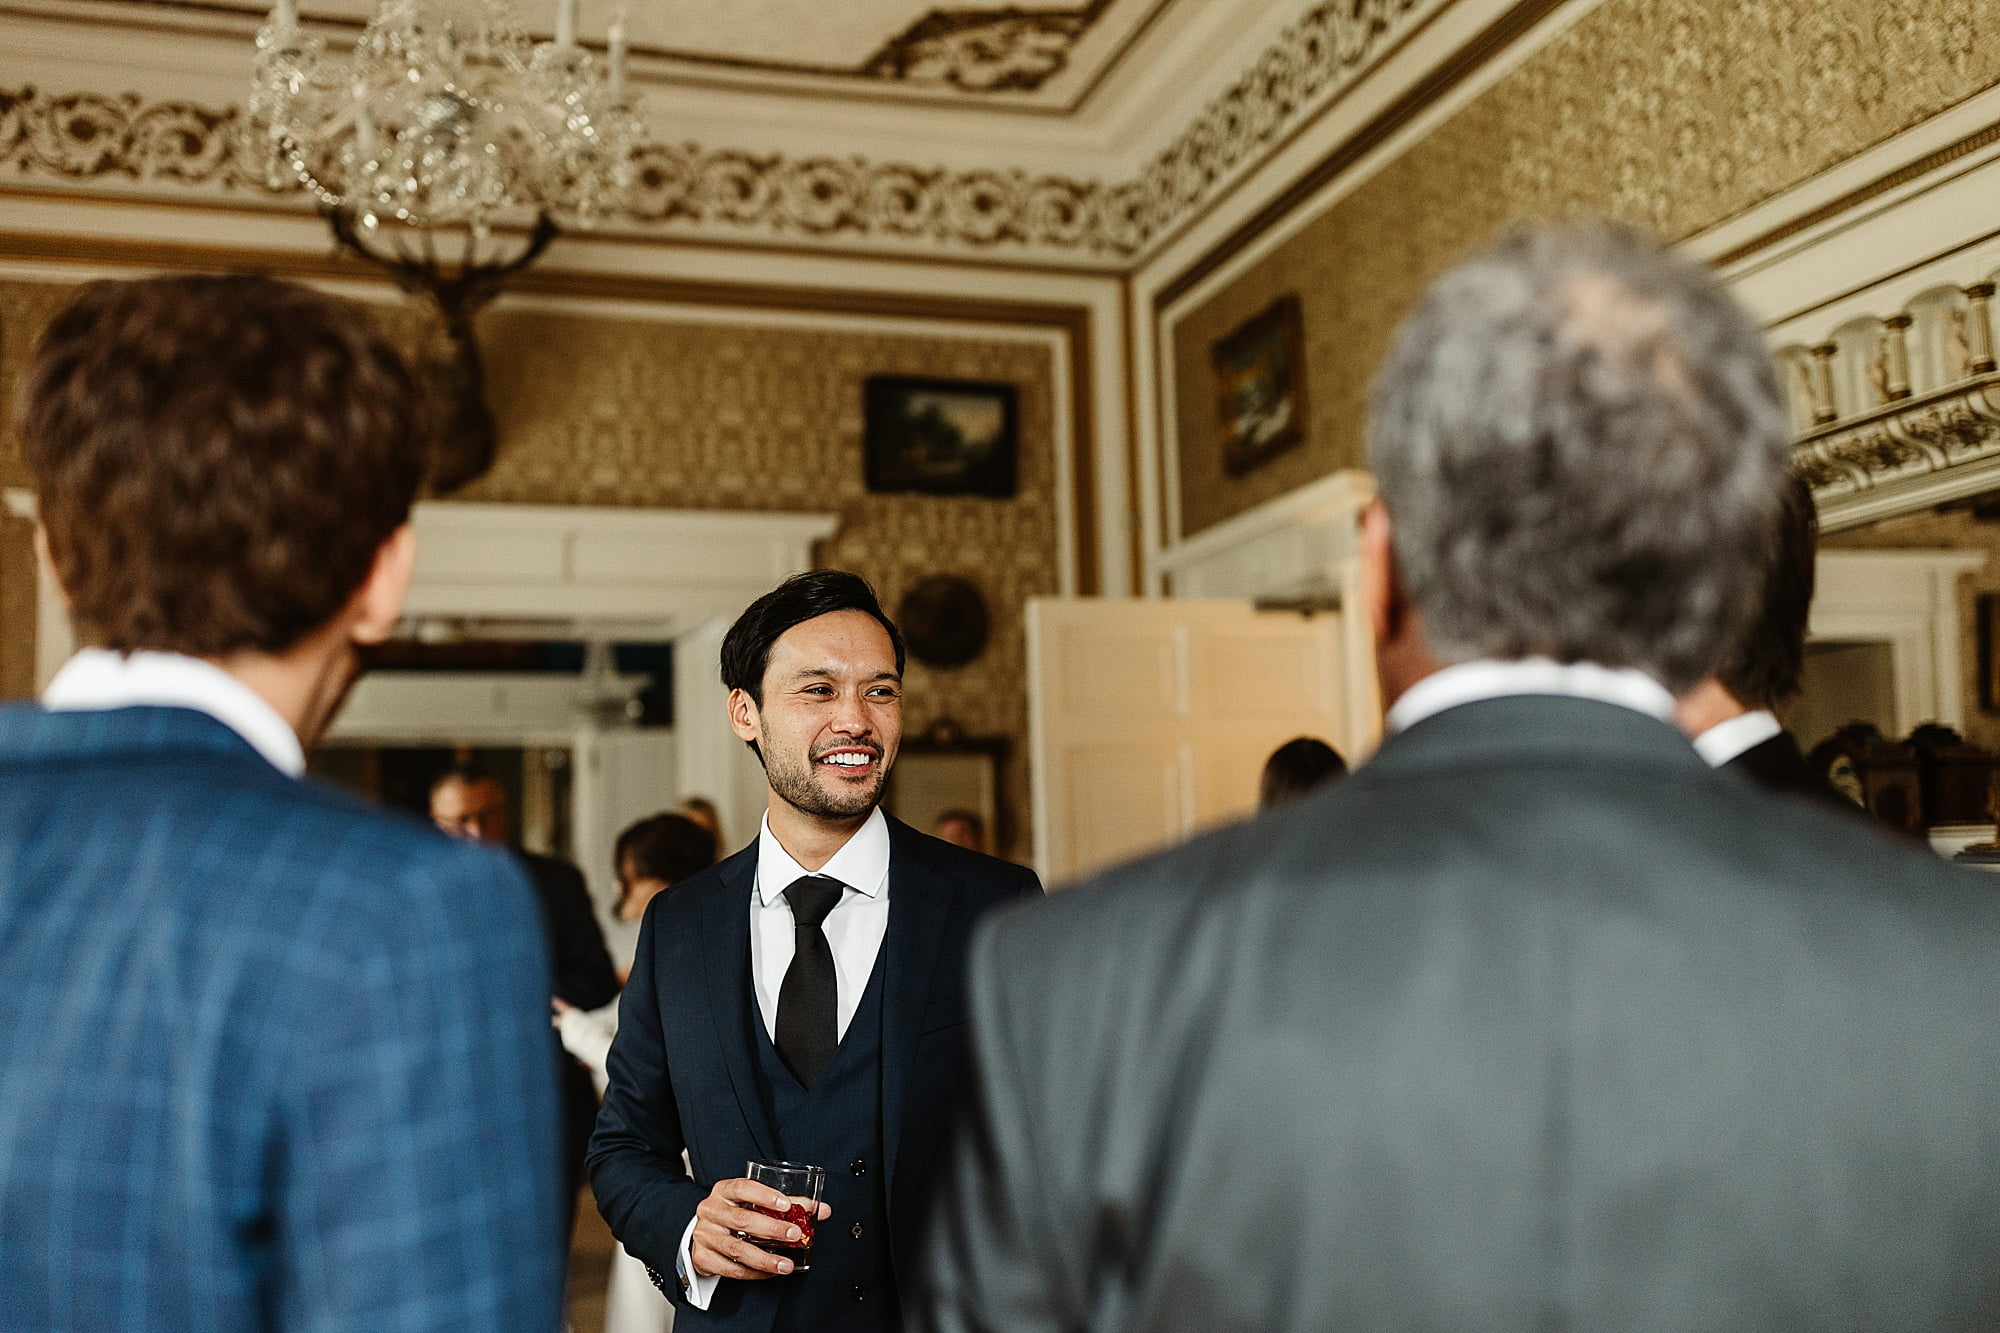 drumtochty castle drinks reception inside gold room groom Indochino suit